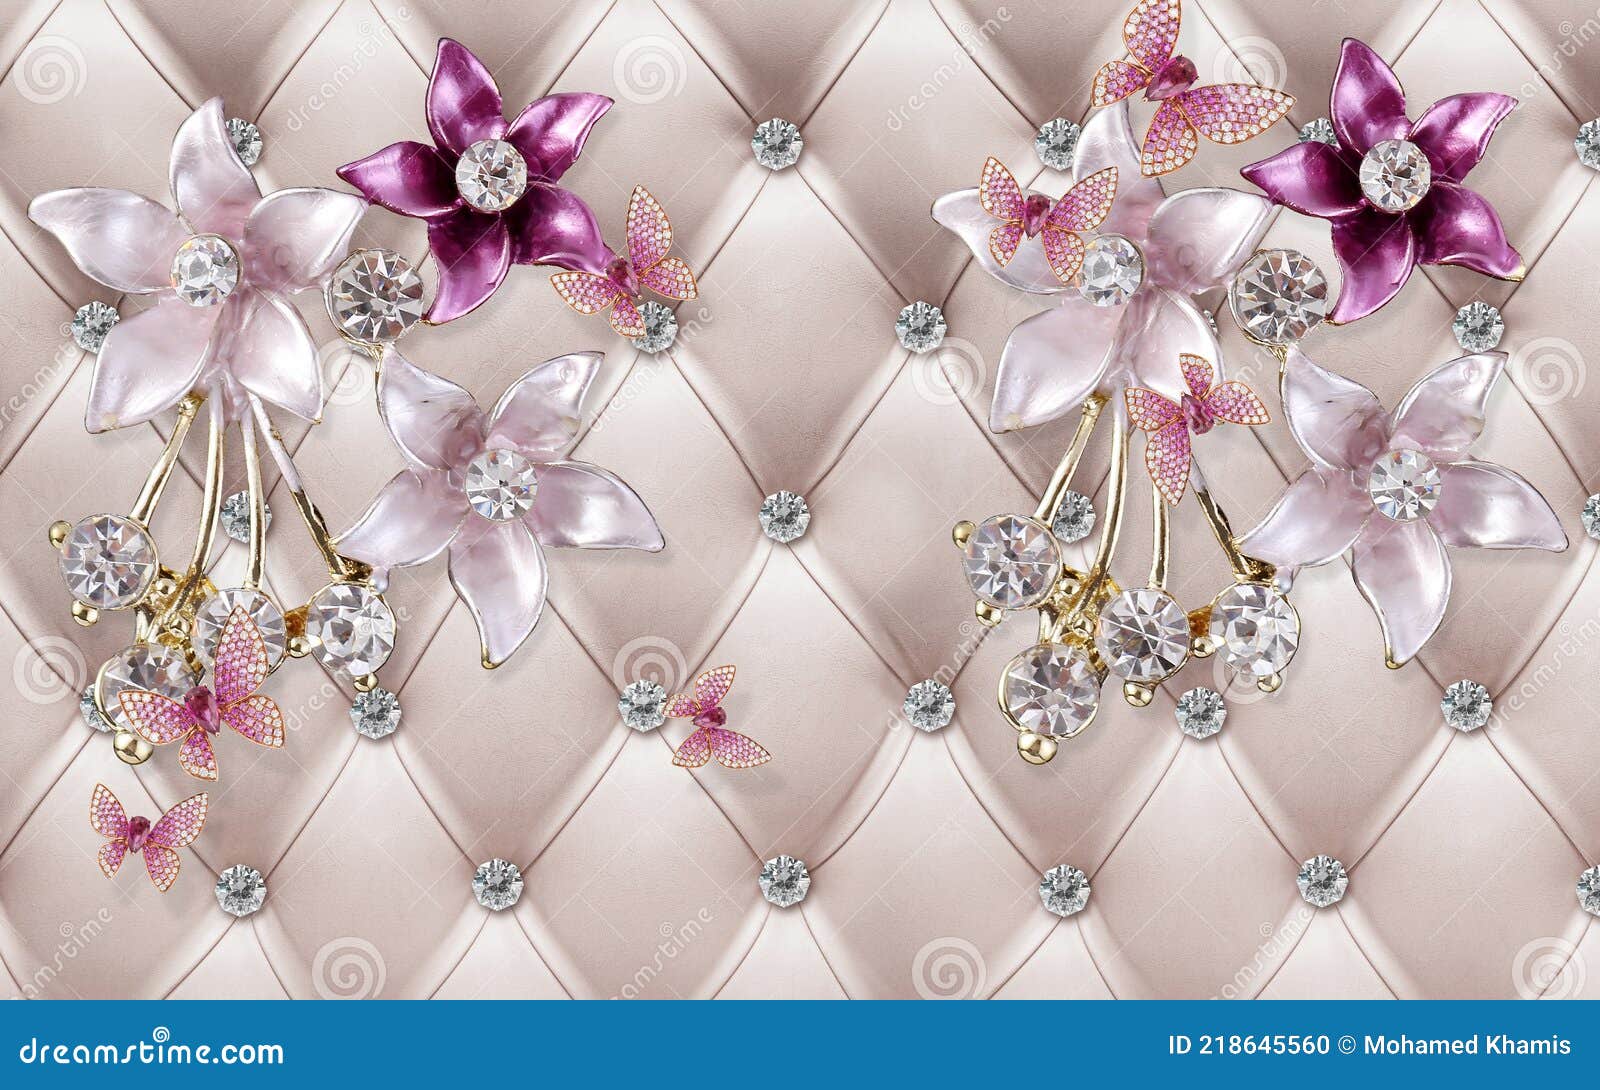 3d Wallpaper Pink and Maroon Jewelry Flowers and Silver Branches on Leather  Background Stock Illustration - Illustration of silver, home: 218645560